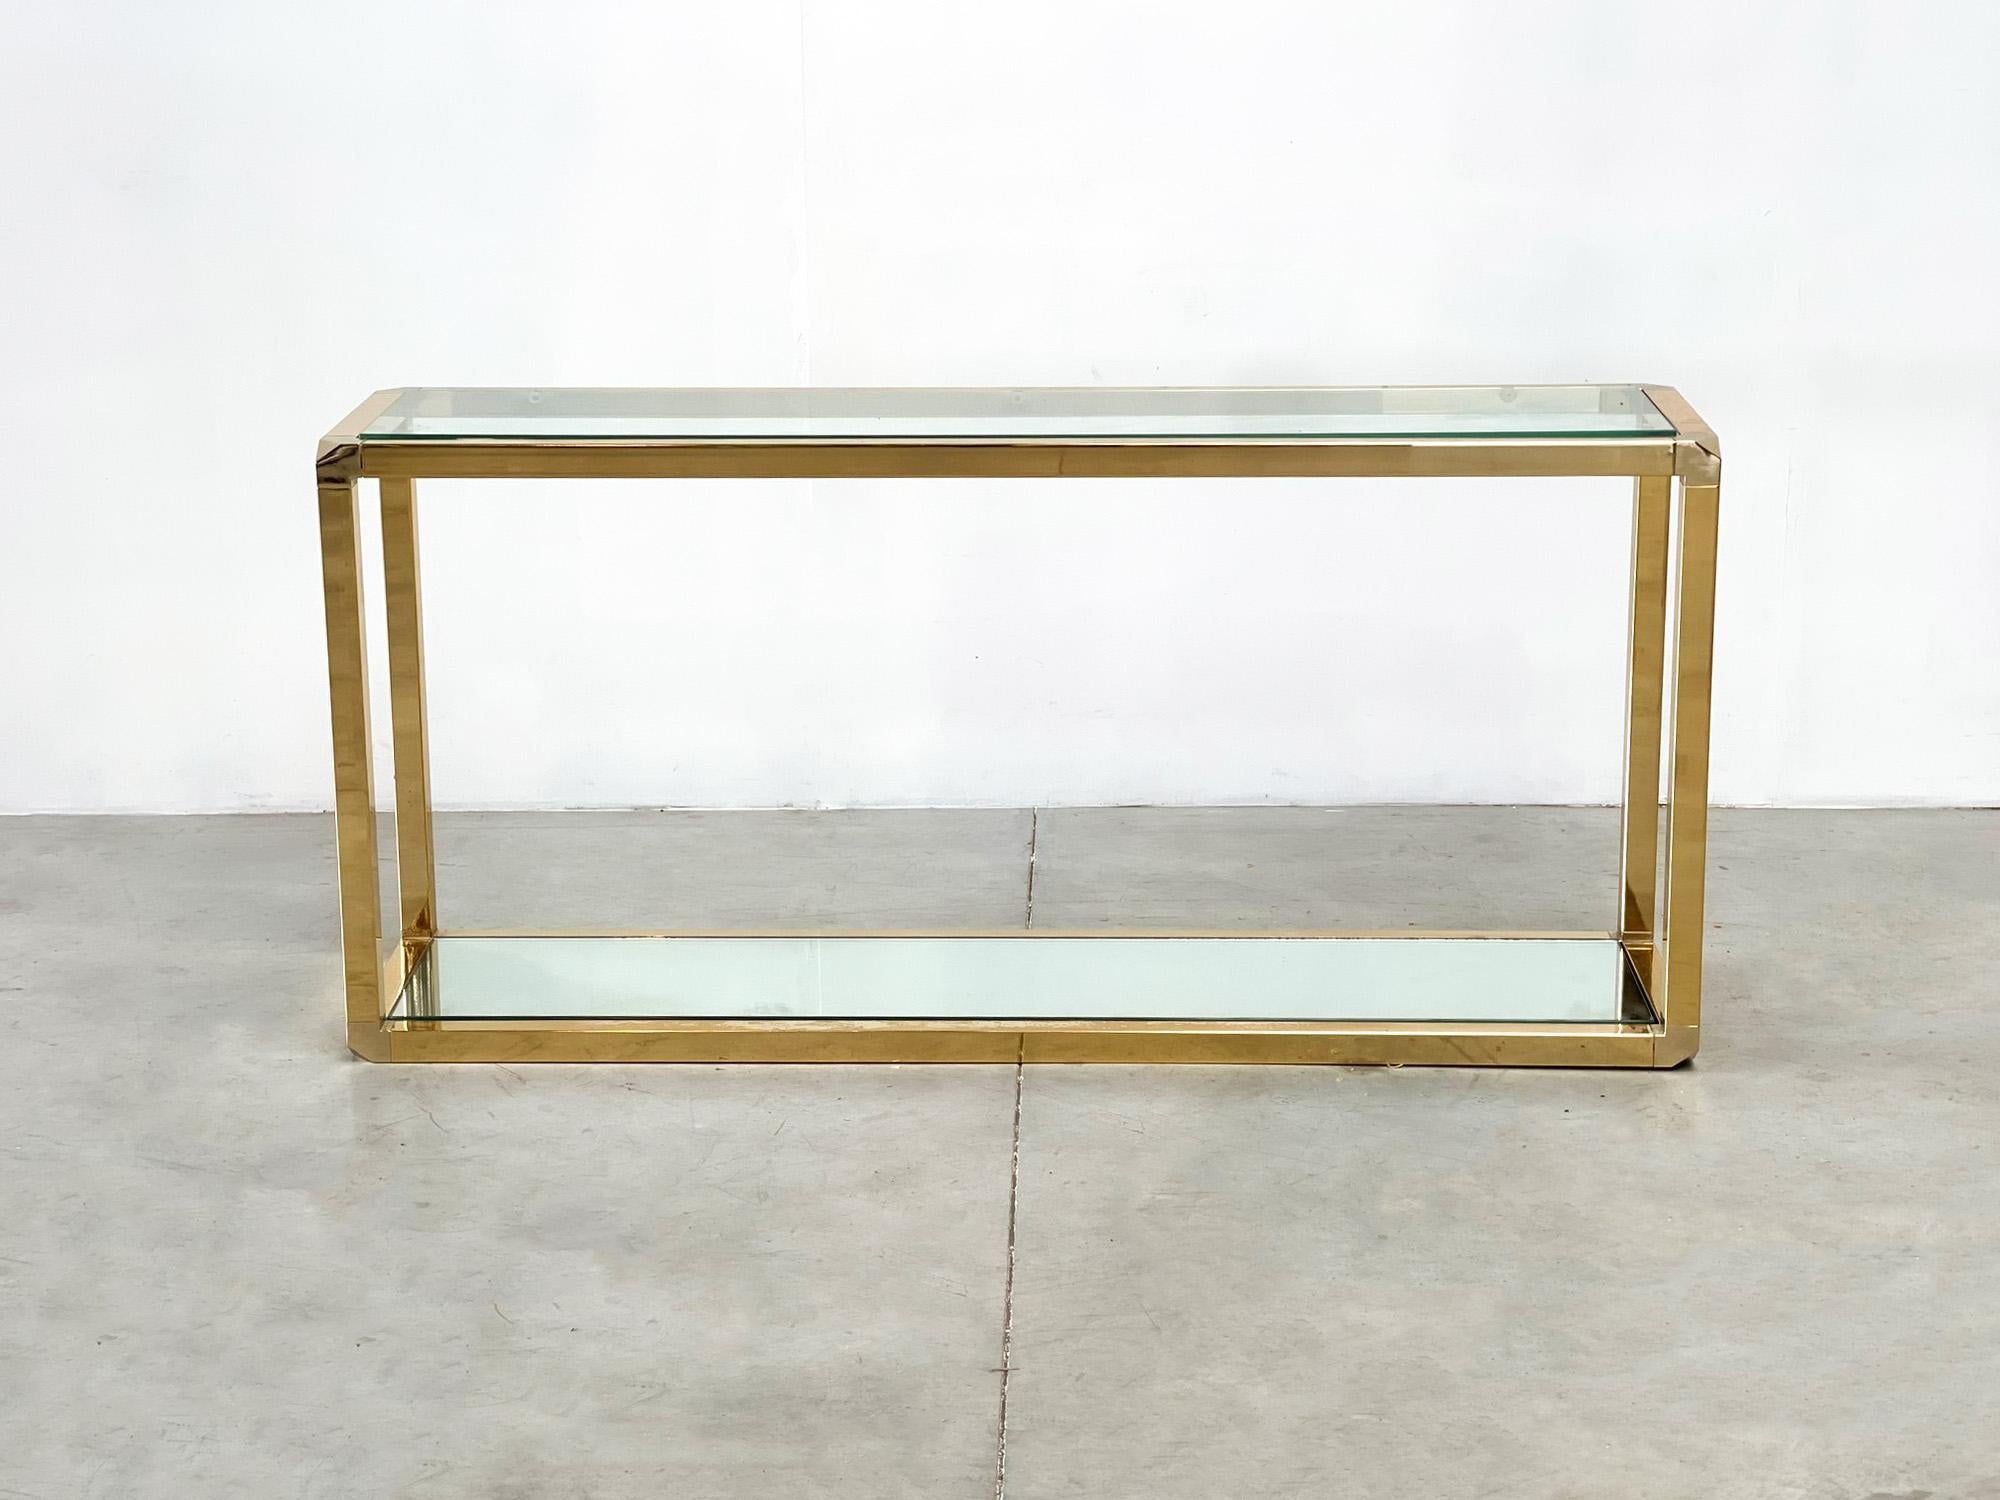 Gold plated etagere / sideboard
Brass etagére probably made by the belgian company Belgo Chrom. 

The etagére has a luxurious feel to it and fits perfectly in an modern setting. 

It is in a very good condition with minimal wear and signs of age. 